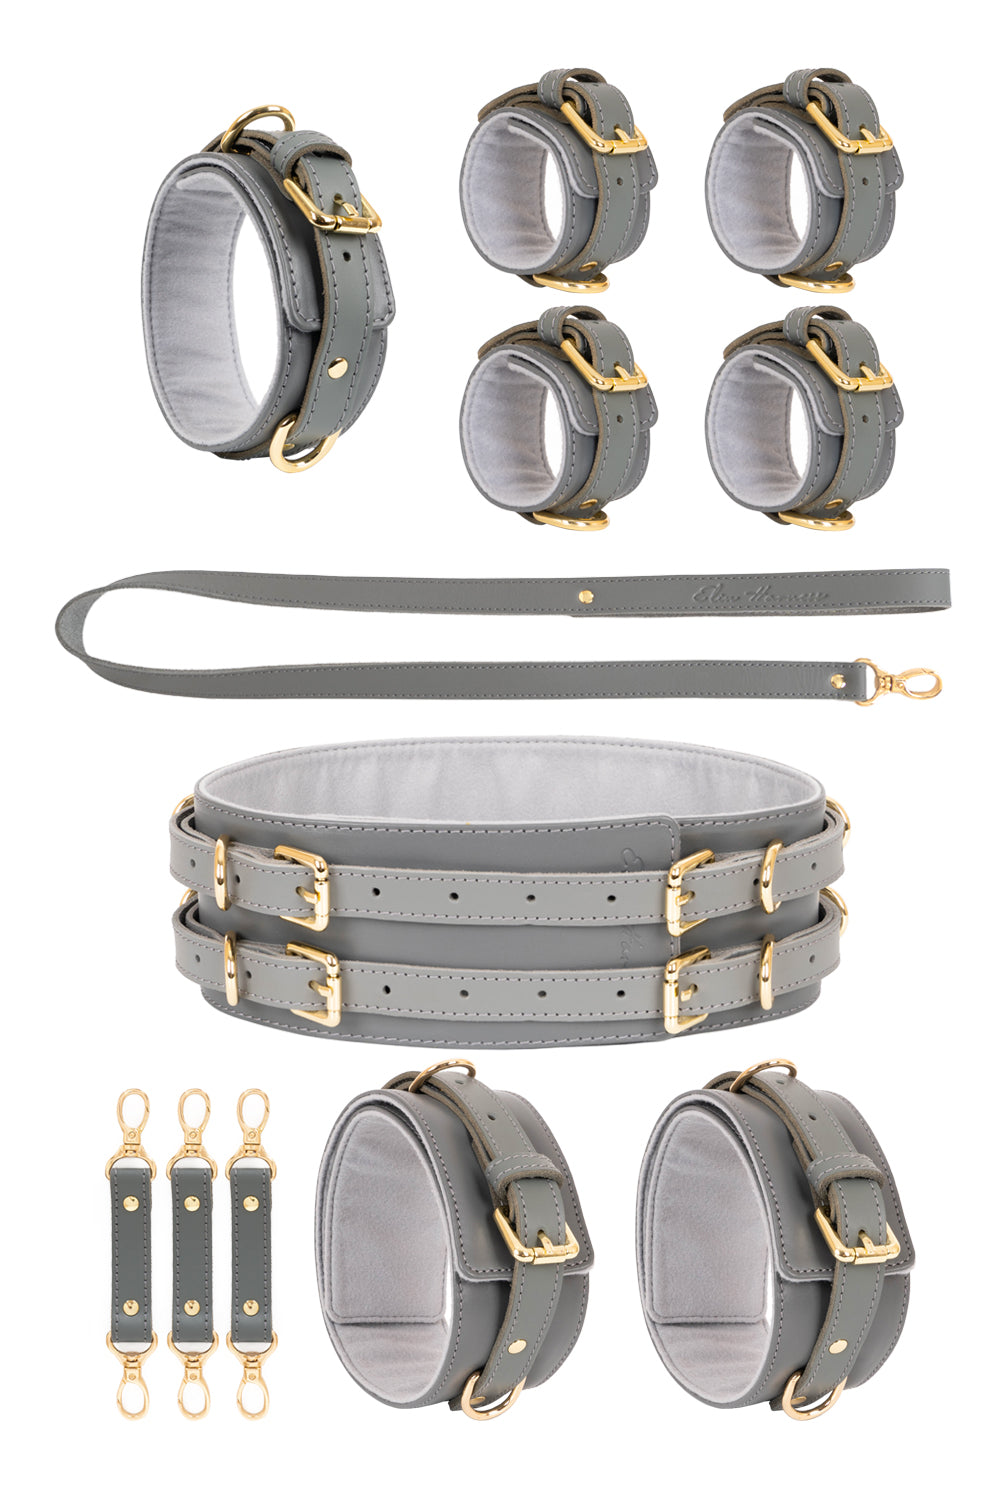 5 in 1 Leather Harness Bondage Set. 10 colors